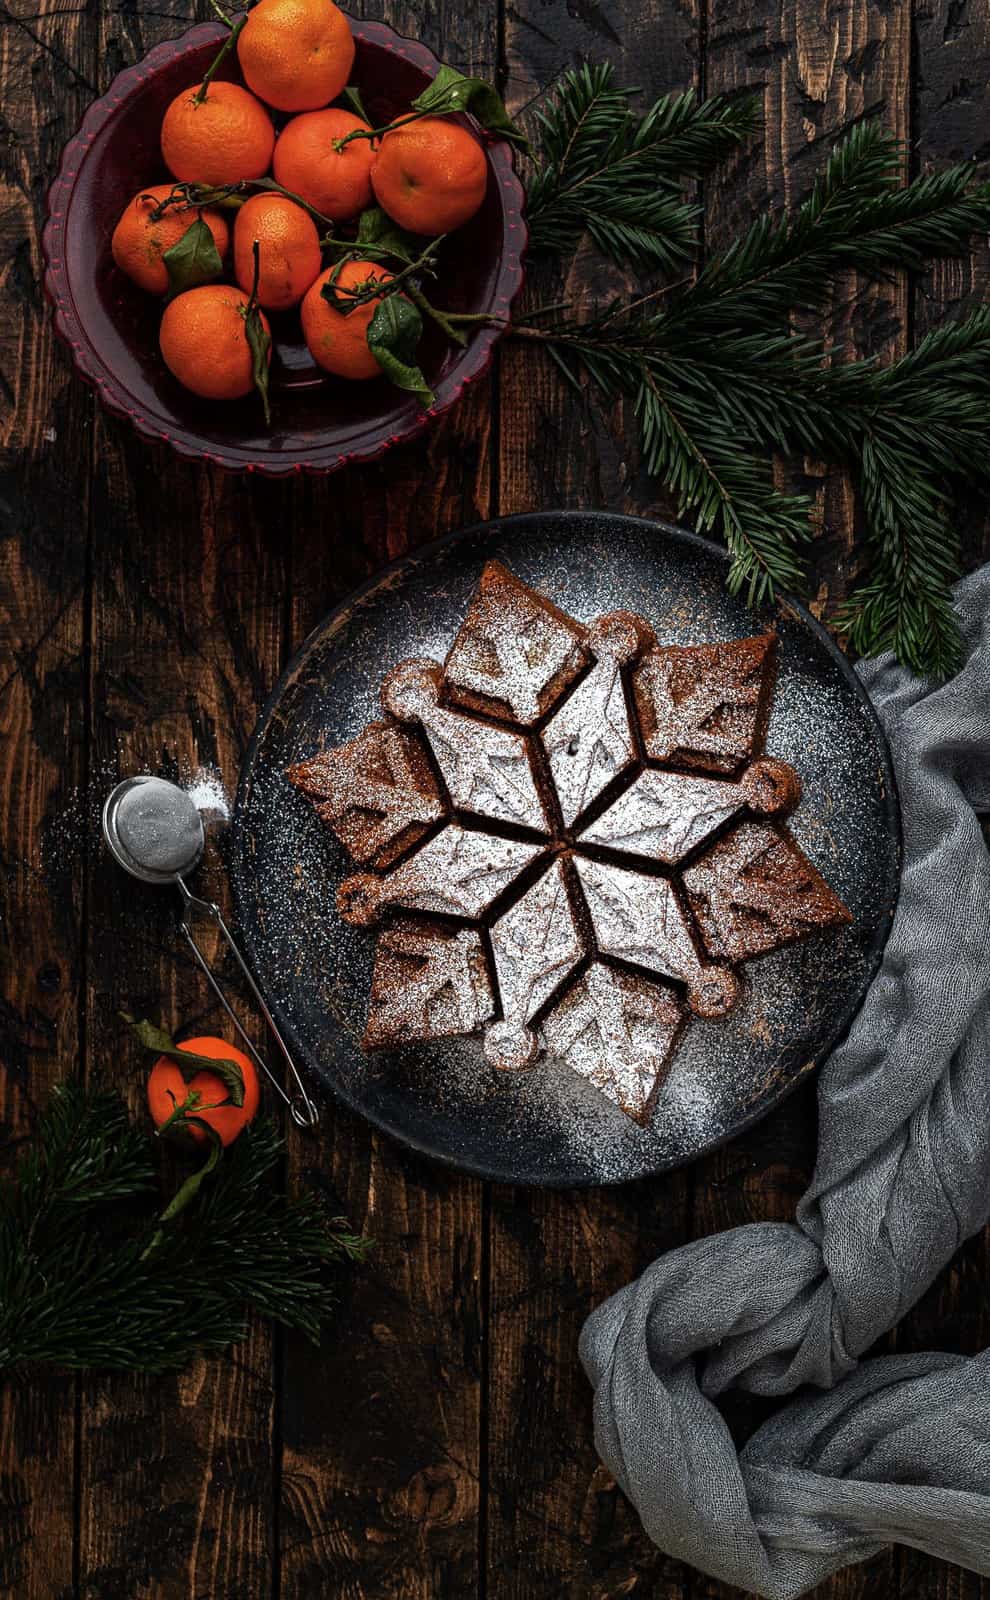 Ginger cake baked in a snowflake cake tin dusted with sugar